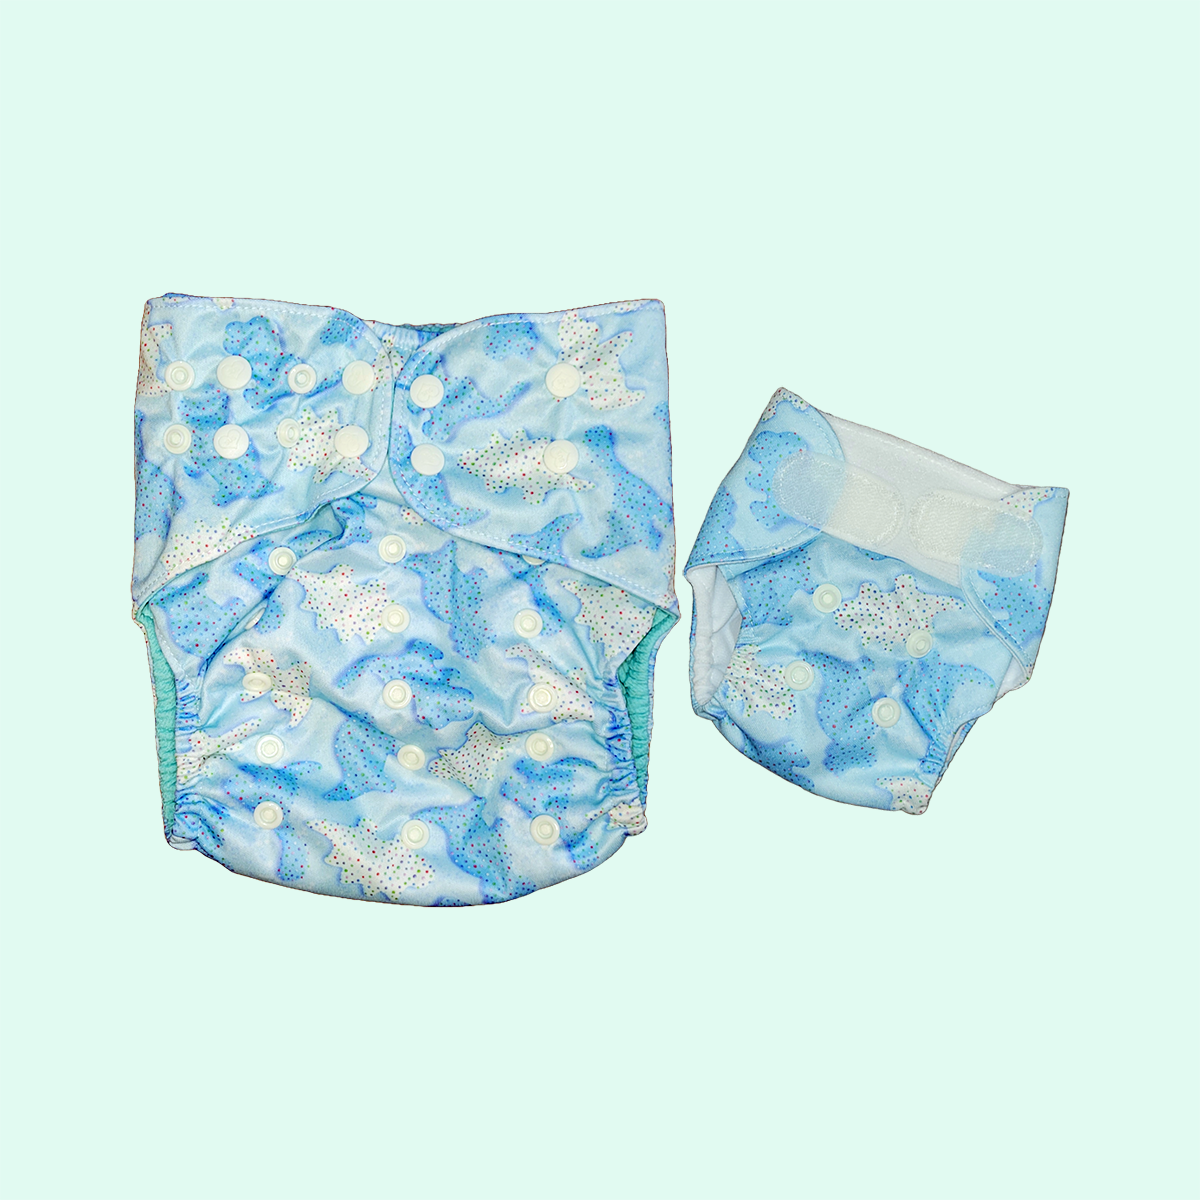 Midsize™ Wonder fit™ Pocket and Dolly Diaper Bundle - Dino Cookies